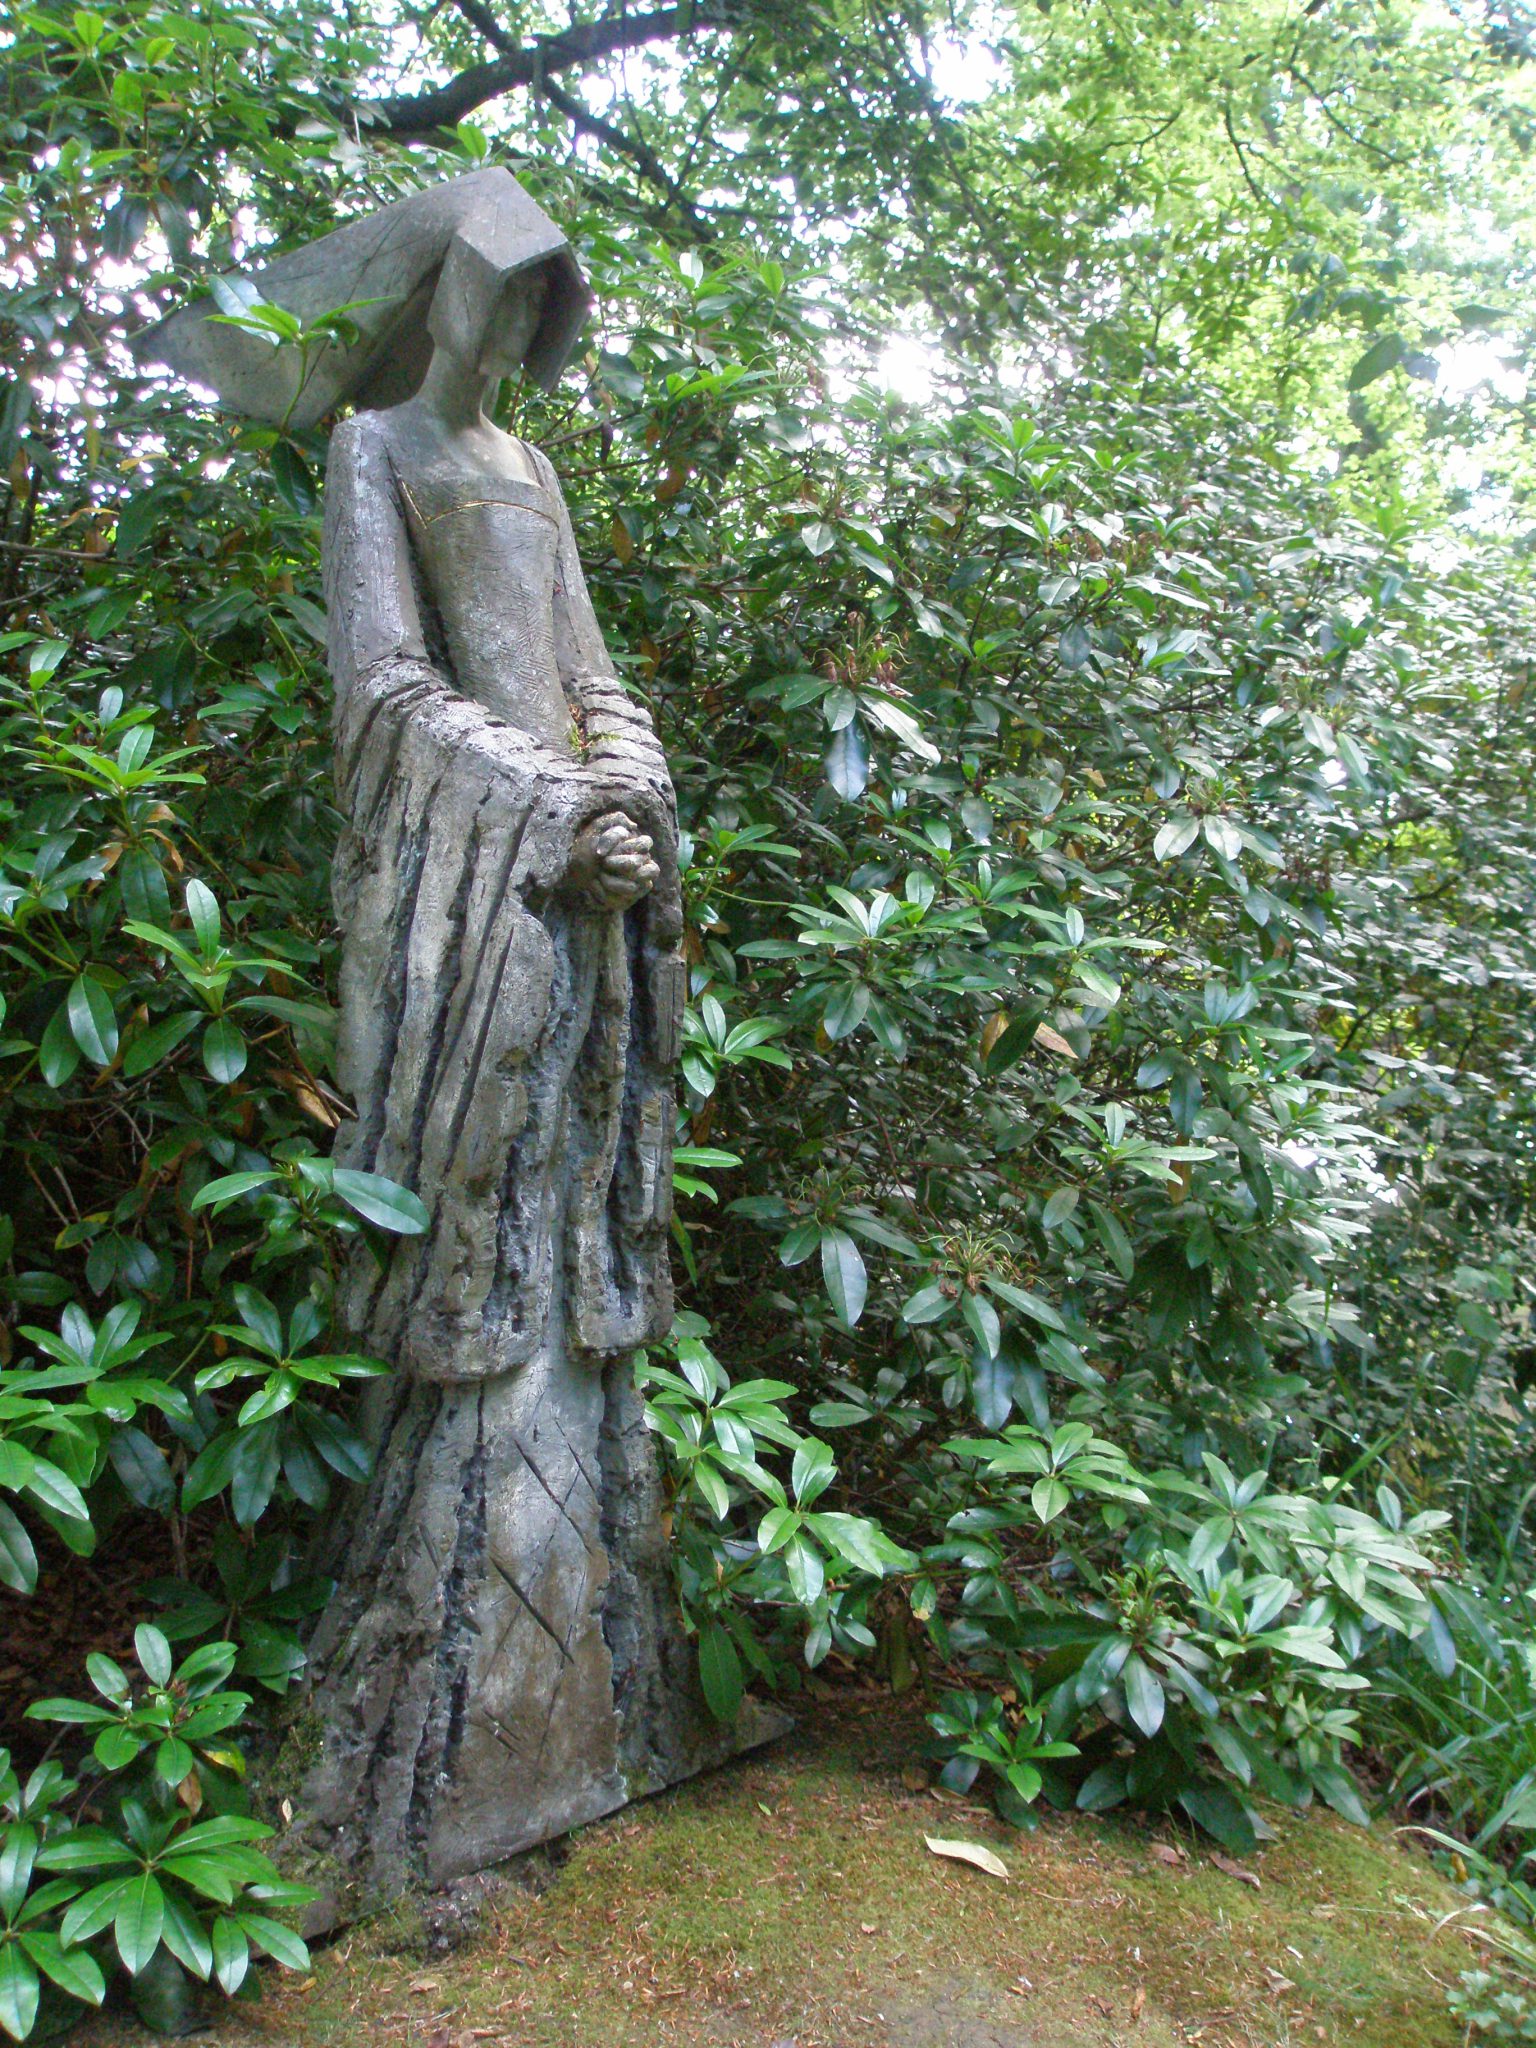 ANNE BOLEYN, by Philip Jackson. This is one of the sculptures that's permanently mounted in Pashley's gardens.